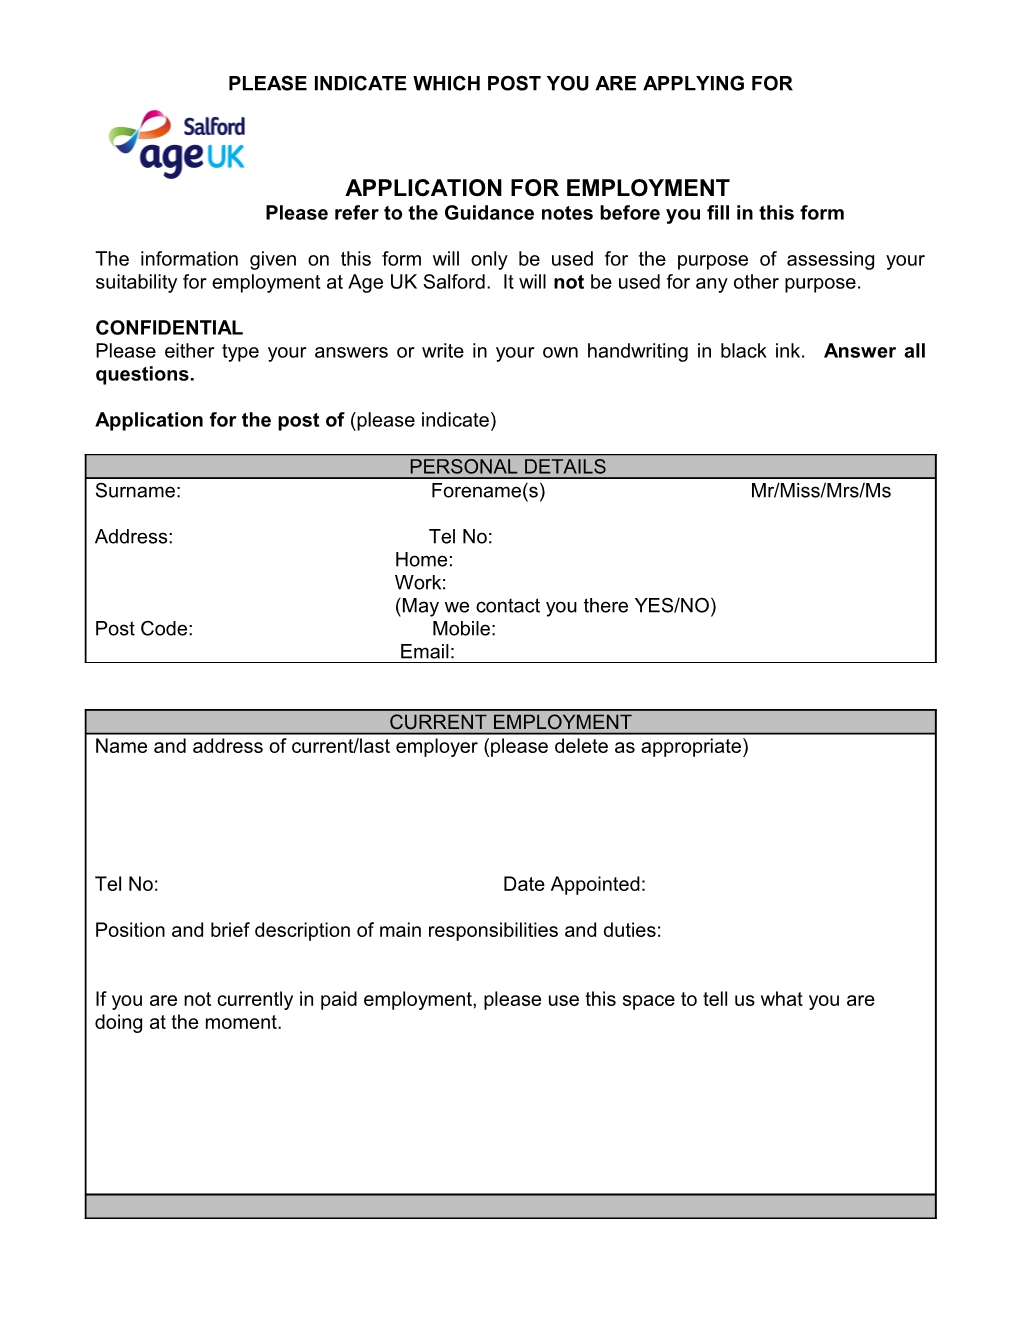 Application for Employment s30